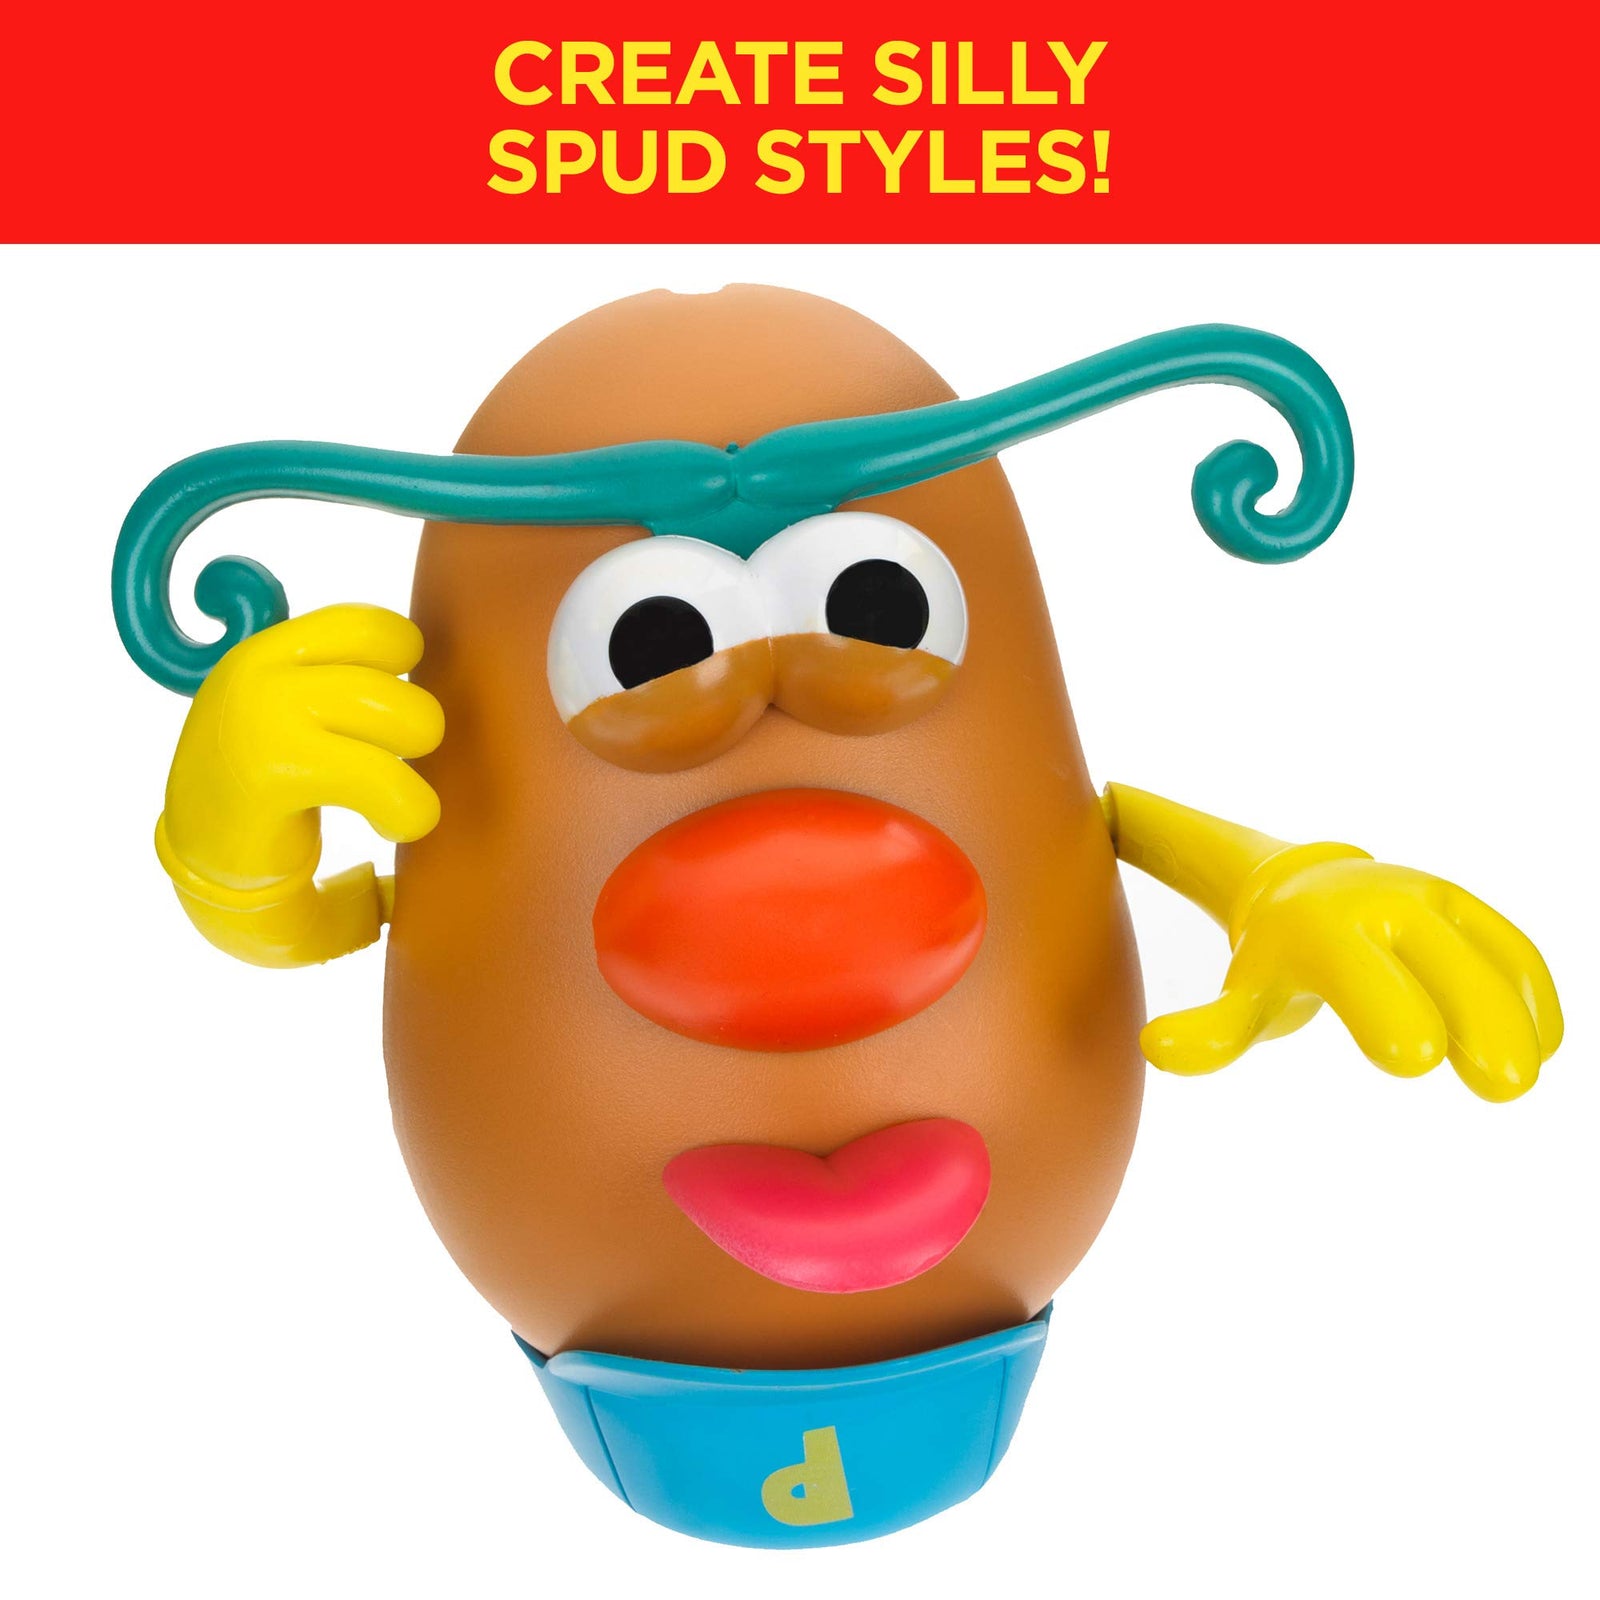 Playskool Mr. Potato Head Silly Suitcase Parts and Pieces Toddler Toy for Kids (Amazon Exclusive)